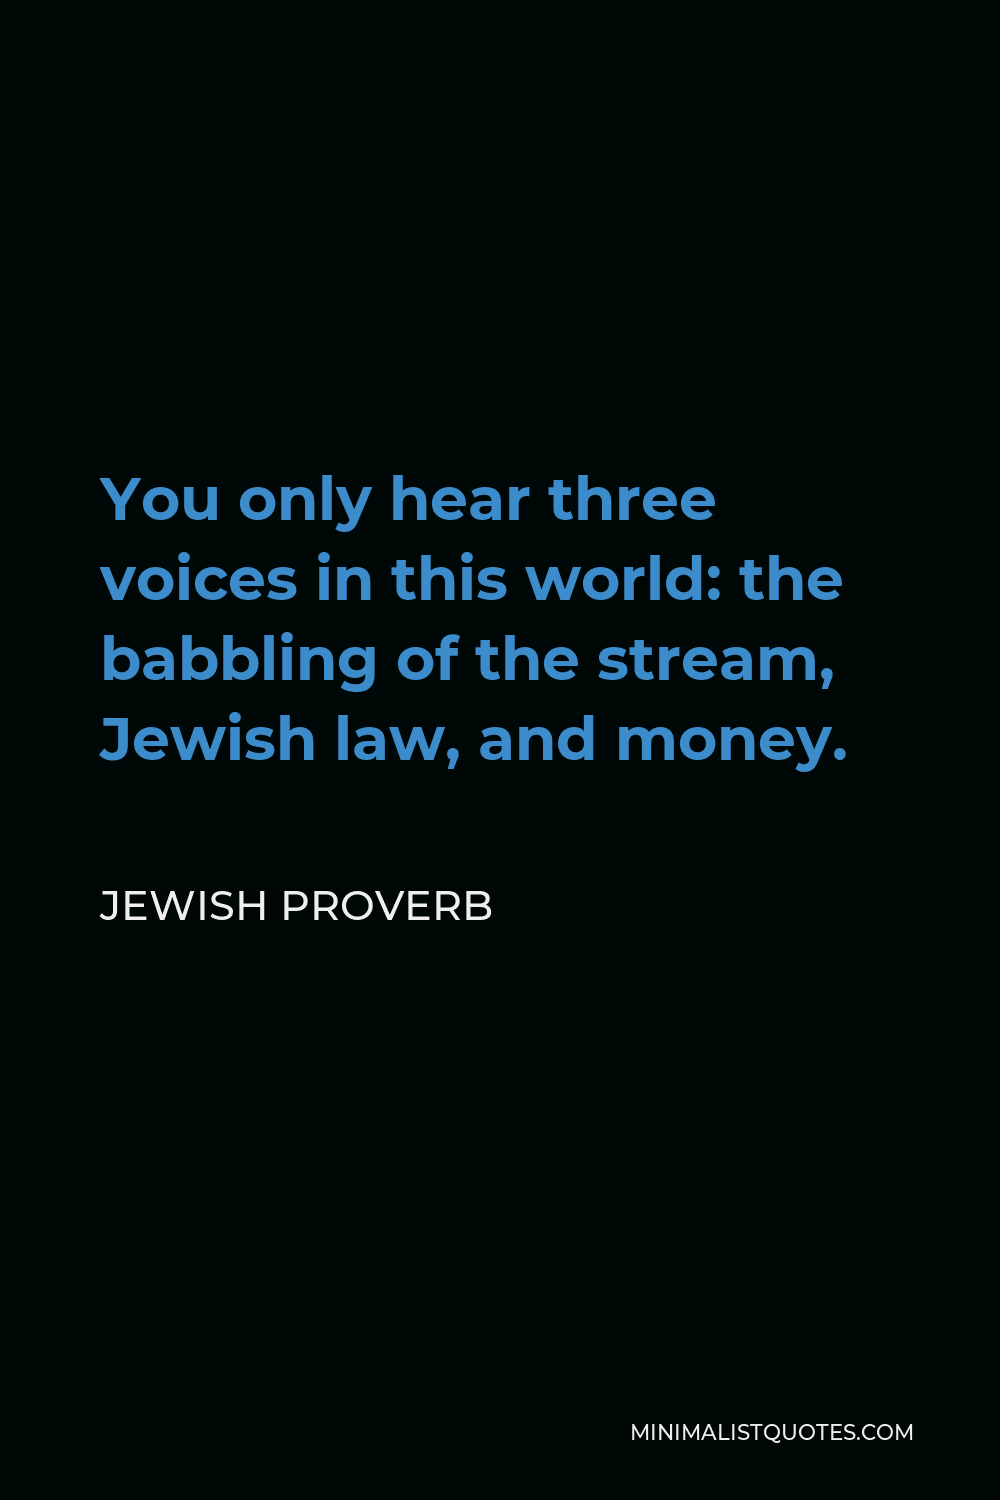 Jewish Proverb Quote - You only hear three voices in this world: the babbling of the stream, Jewish law, and money.